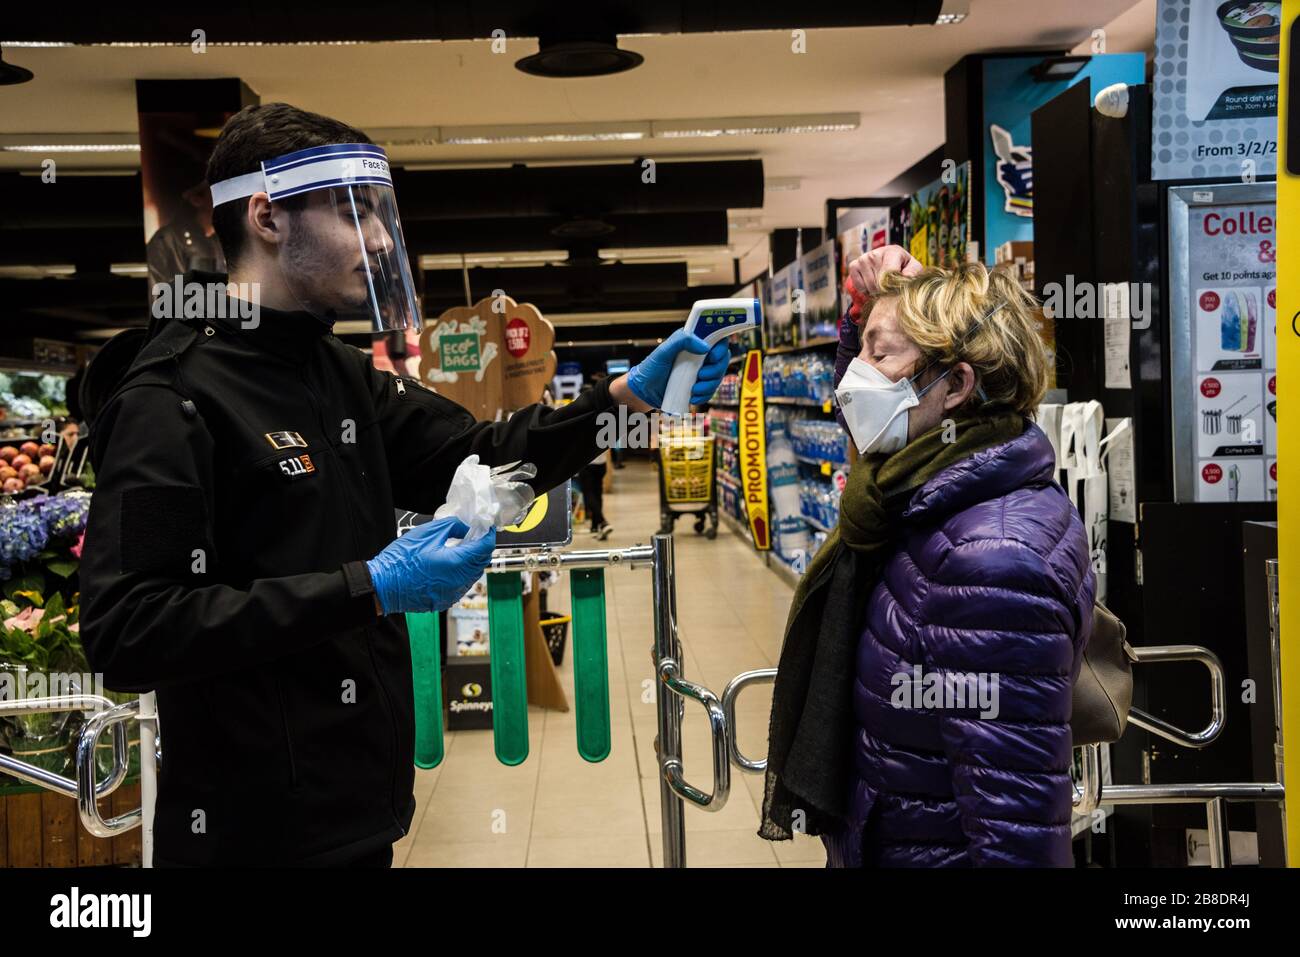 Spinneys, Beirut, Lebanon. 21st Mar, 2020. In an effort to slow the spread of COVID19, a member of staff scans all shoppers' foreheads with a temperature scanner before they enter the supermarket. Those with a temperature above 38 degrees celcius are given gloves to wear while they shop. Credit: Elizabeth Fitt/Alamy Live News Stock Photo